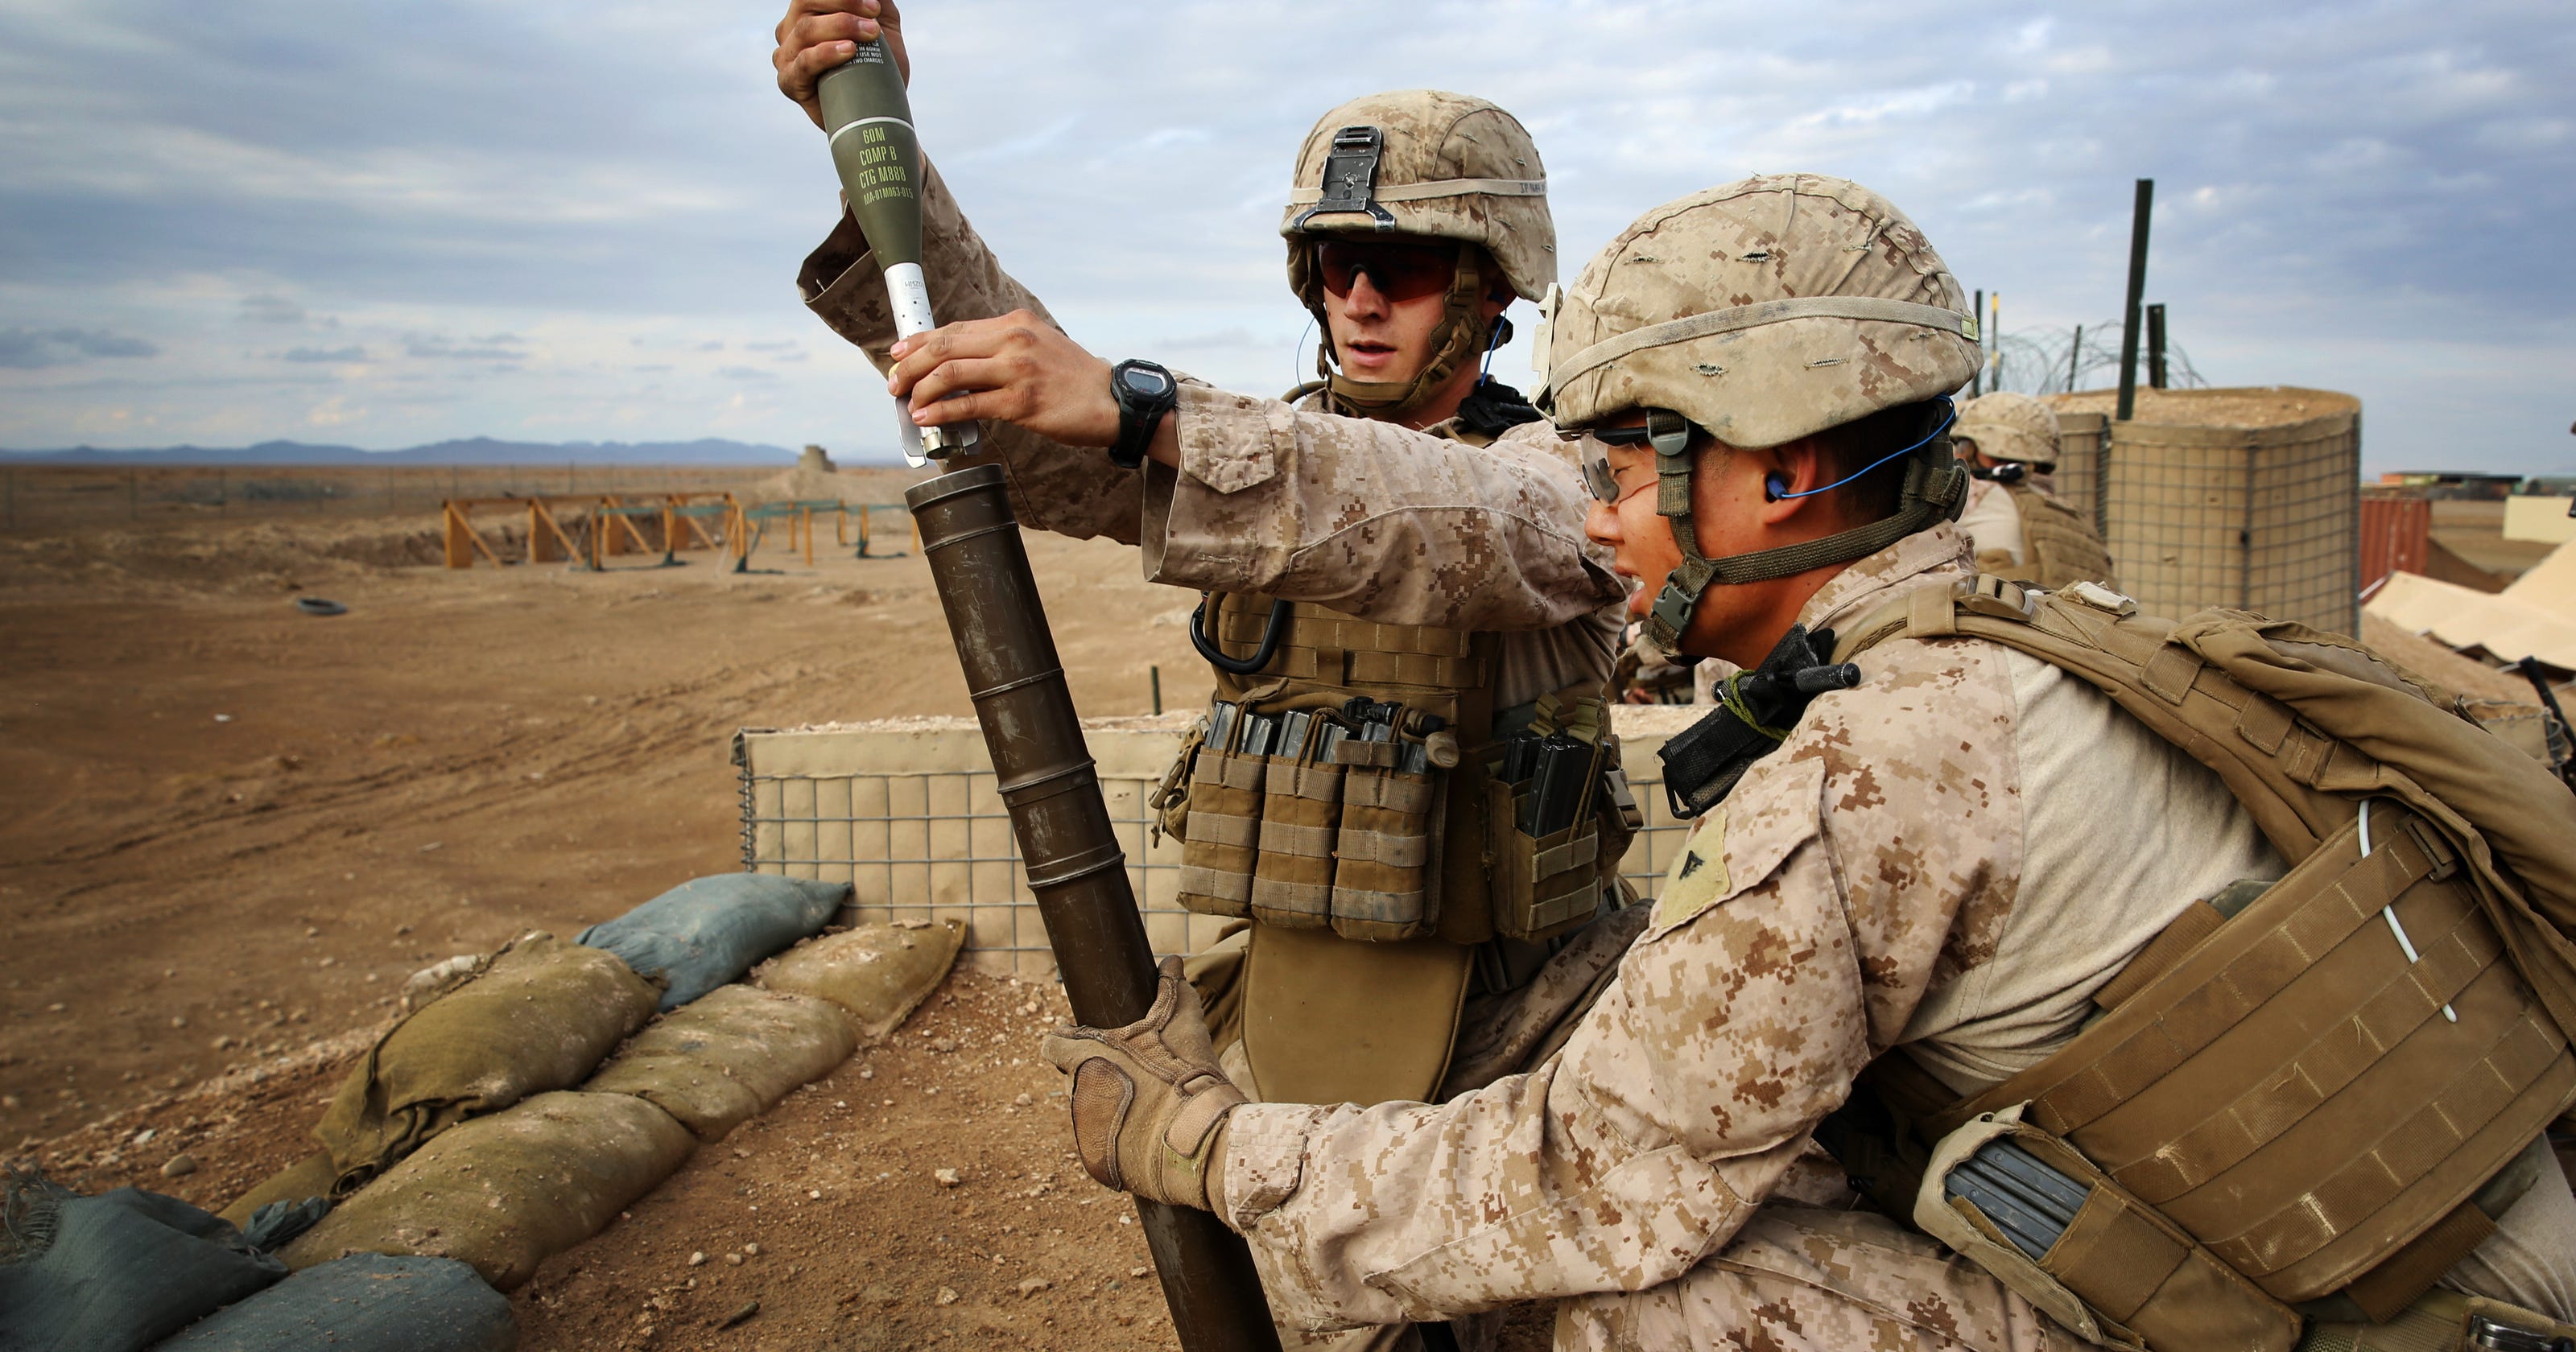 Corps seeks prior-service Marines for some specialties